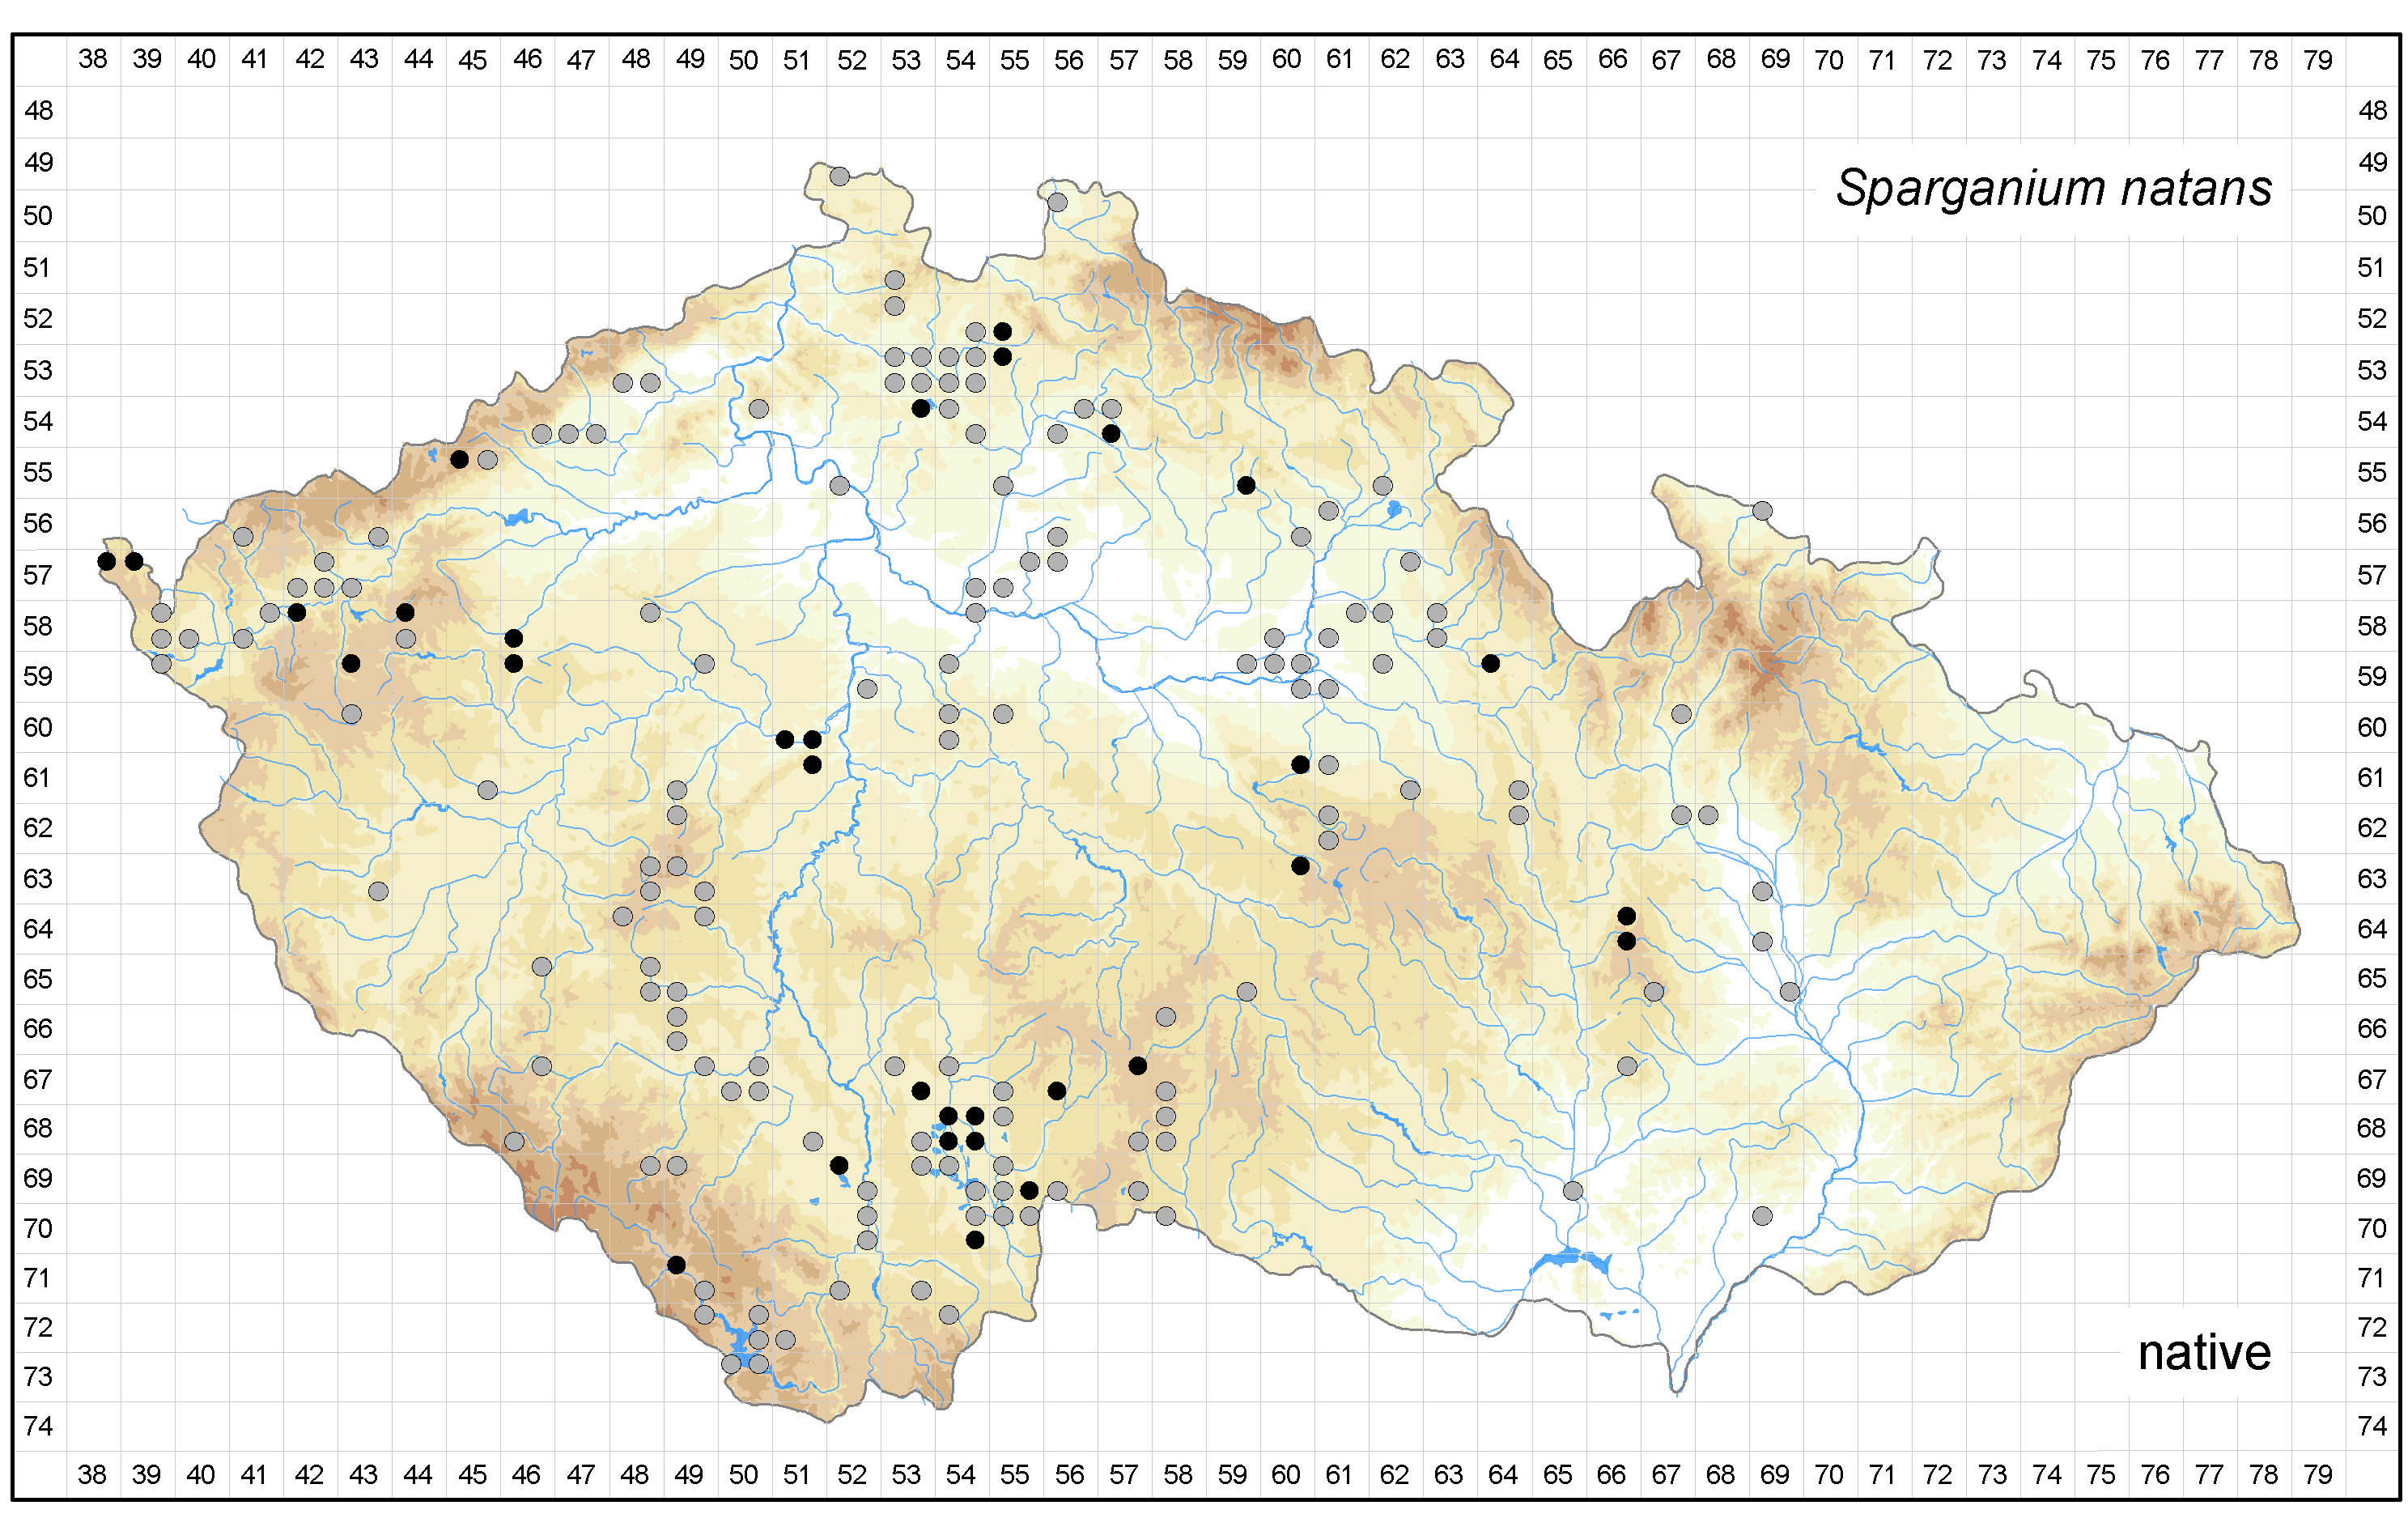 Distribution of Sparganium natans in the Czech Republic Author of the map: Zdenek Kaplan Map produced on: 20-11-2015 Database records used for producing the distribution map of Sparganium natans